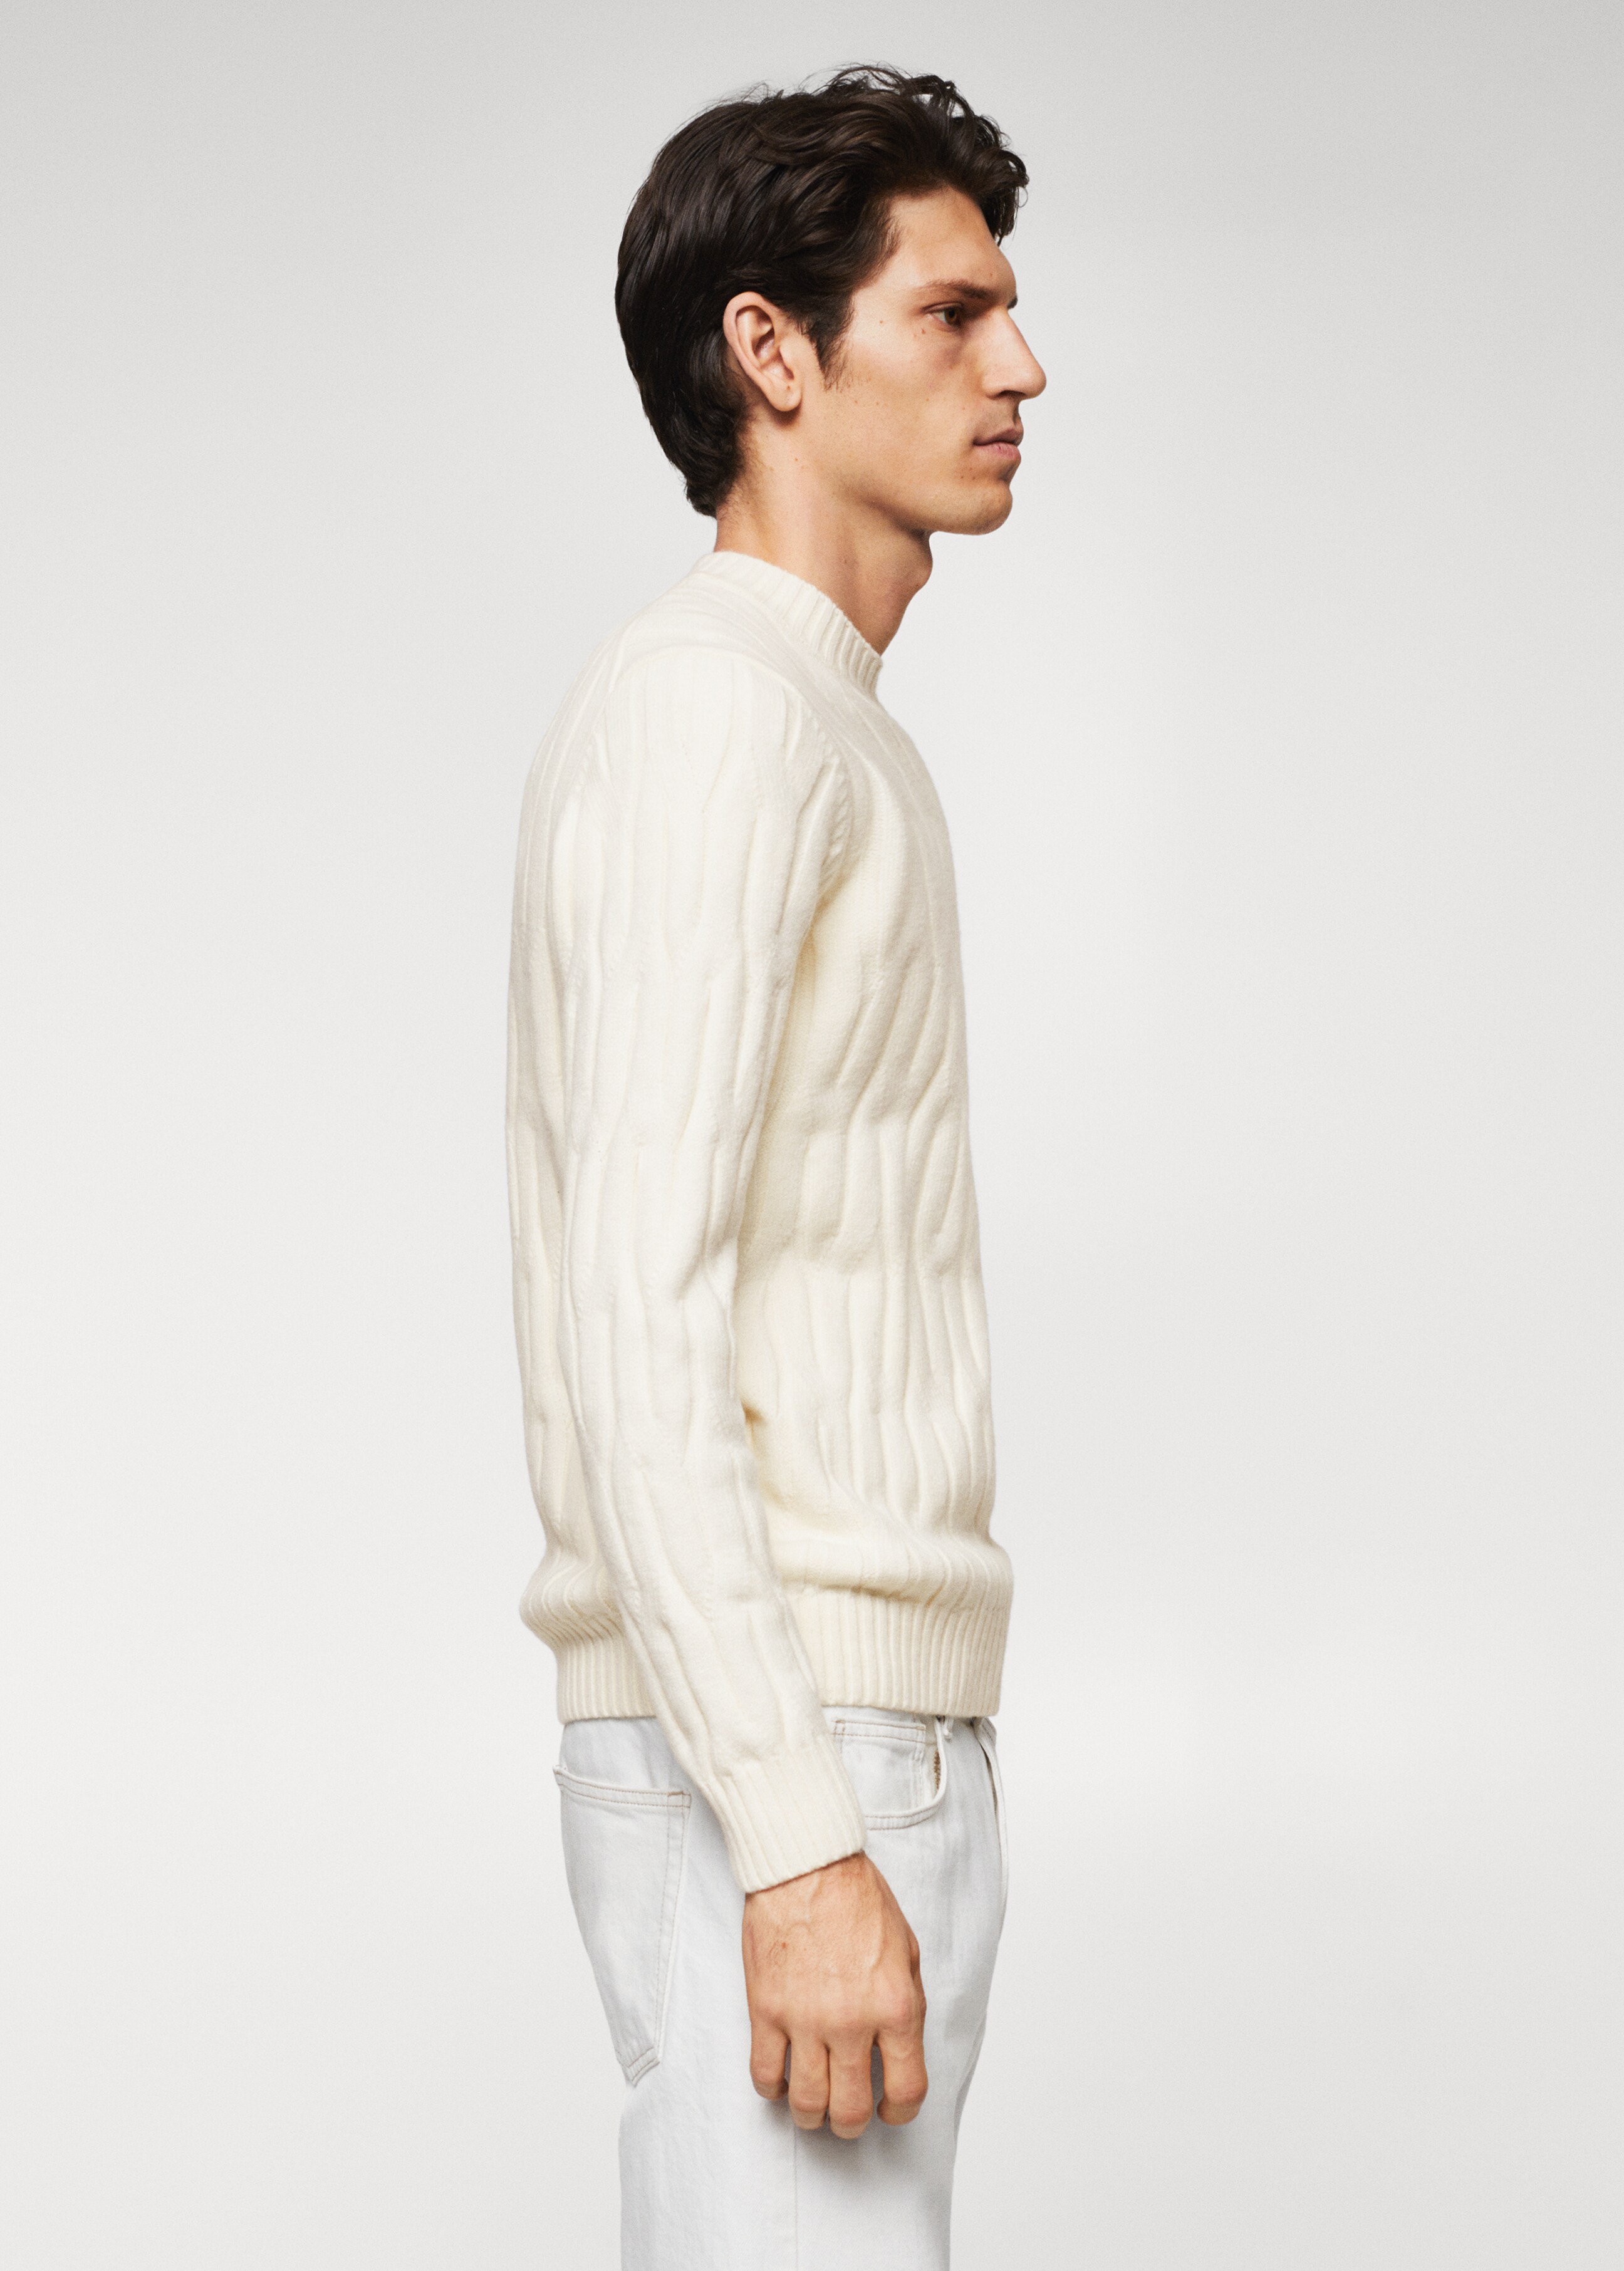 Knitted braided sweater - Details of the article 6